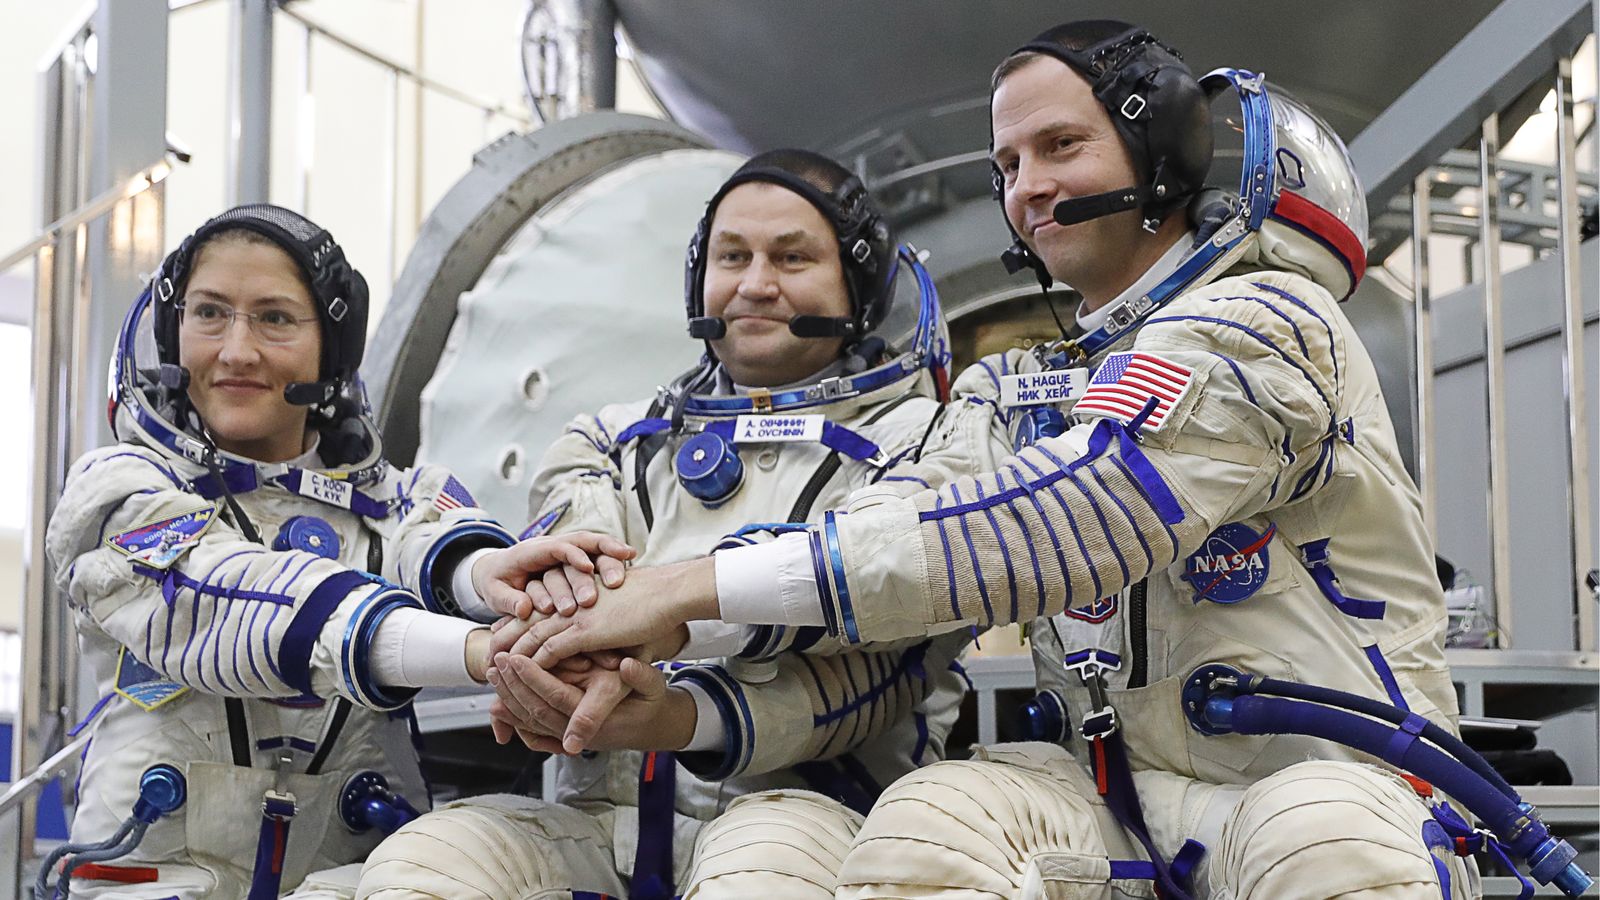 The astronauts who have visited the International Space Station